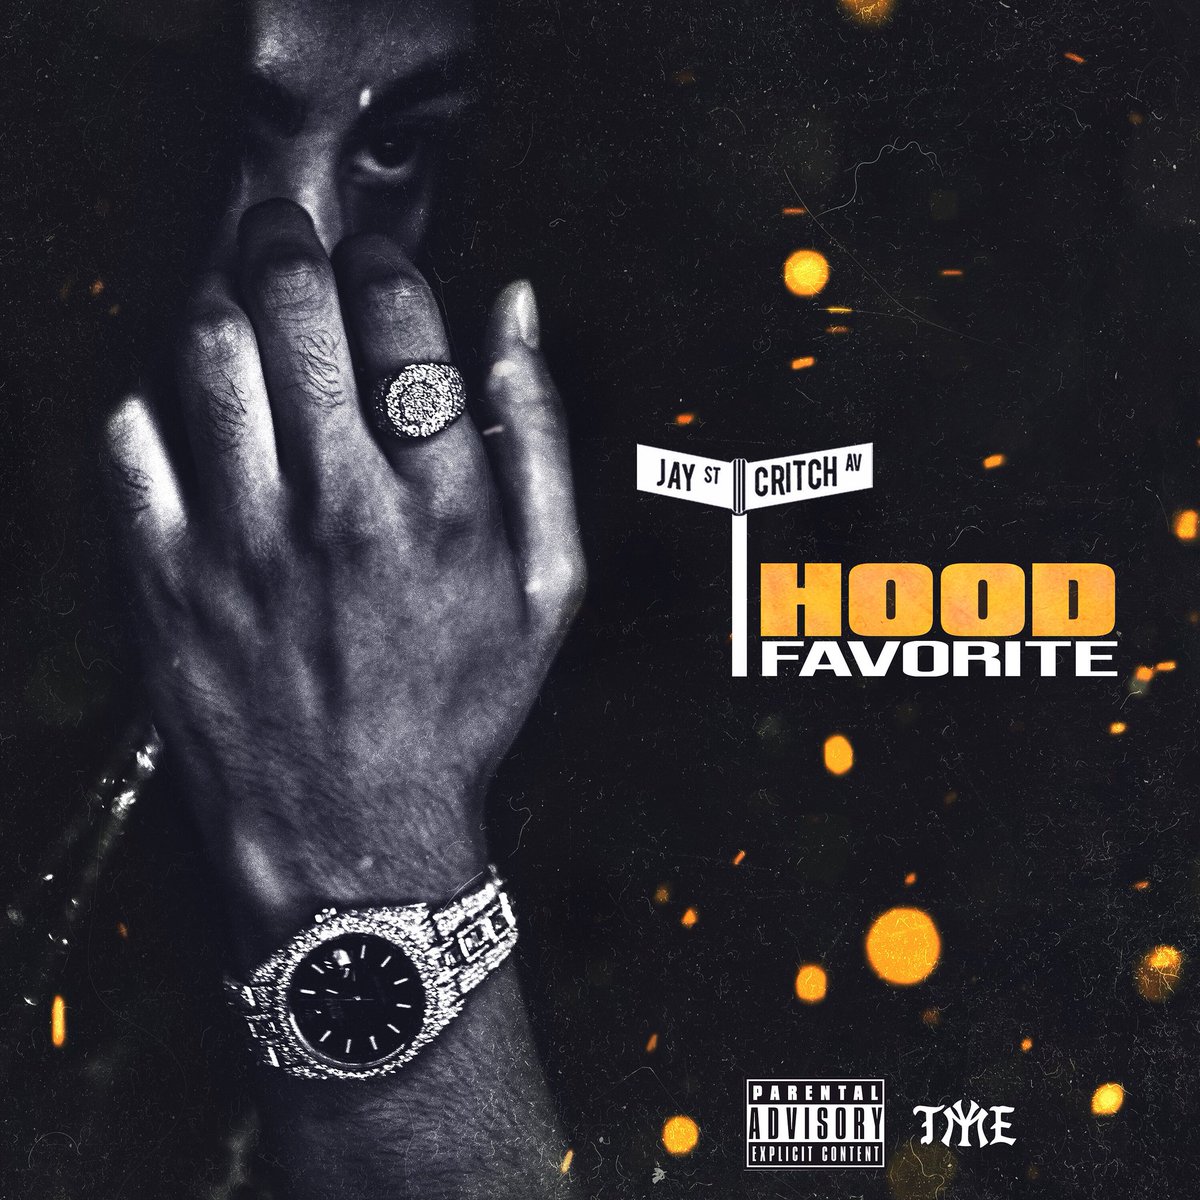 Stream Jay Critch’s New Project “Hood Favorite”